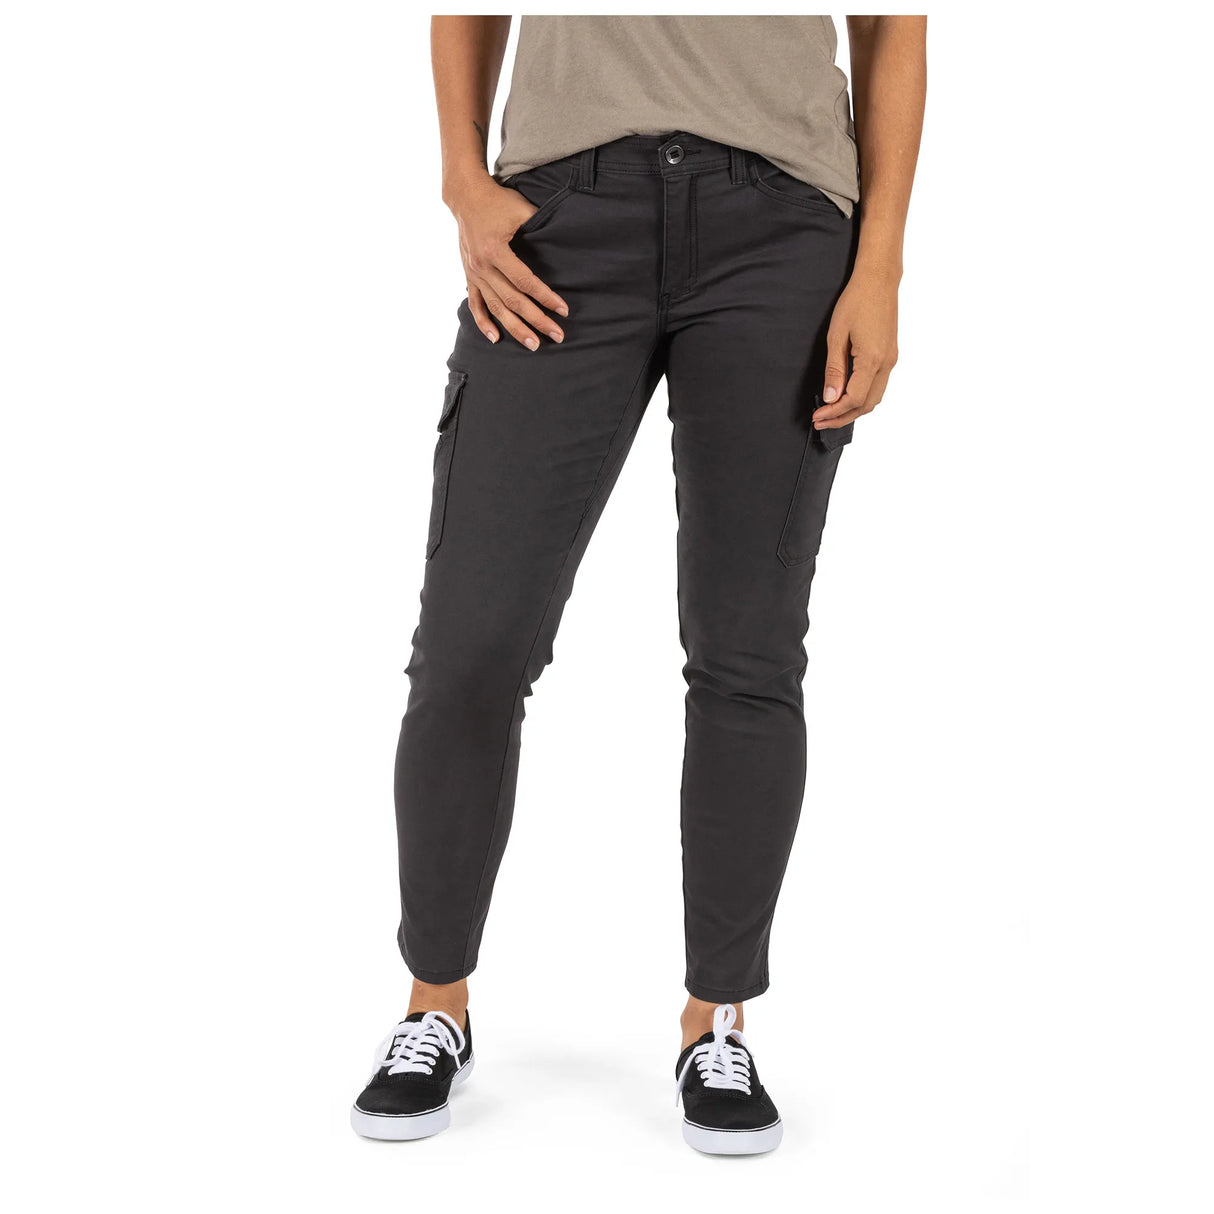 BREACH & CLEAR - Ascent Pant - Womens